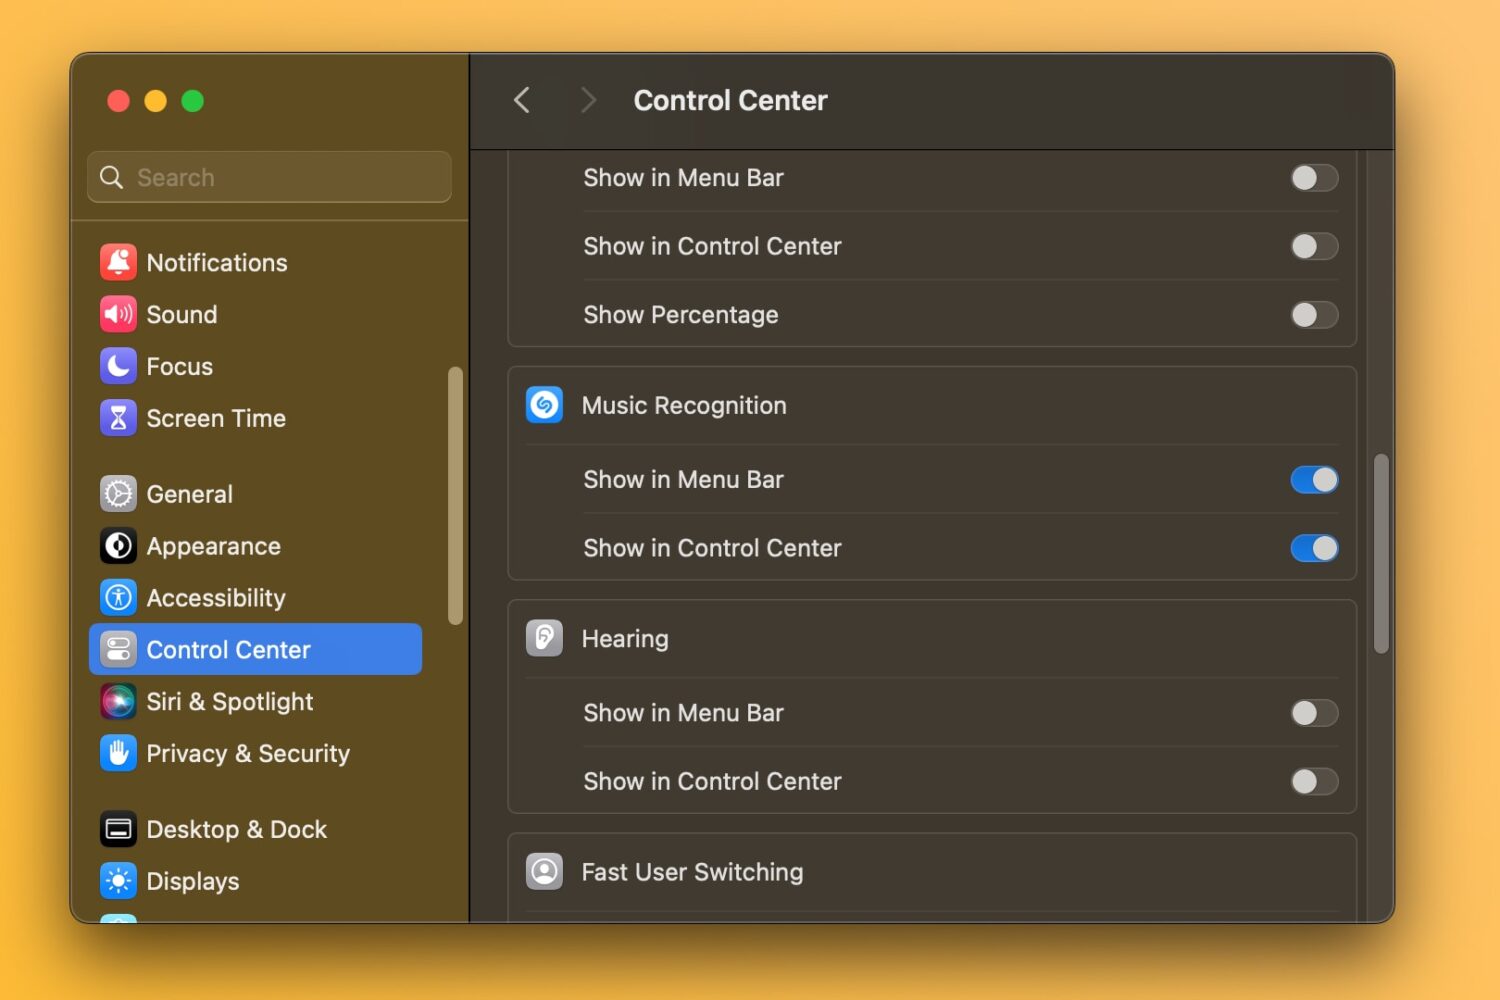 The Mac's System Settings app showing Music Recognition enabled for the menu bar and Control Center